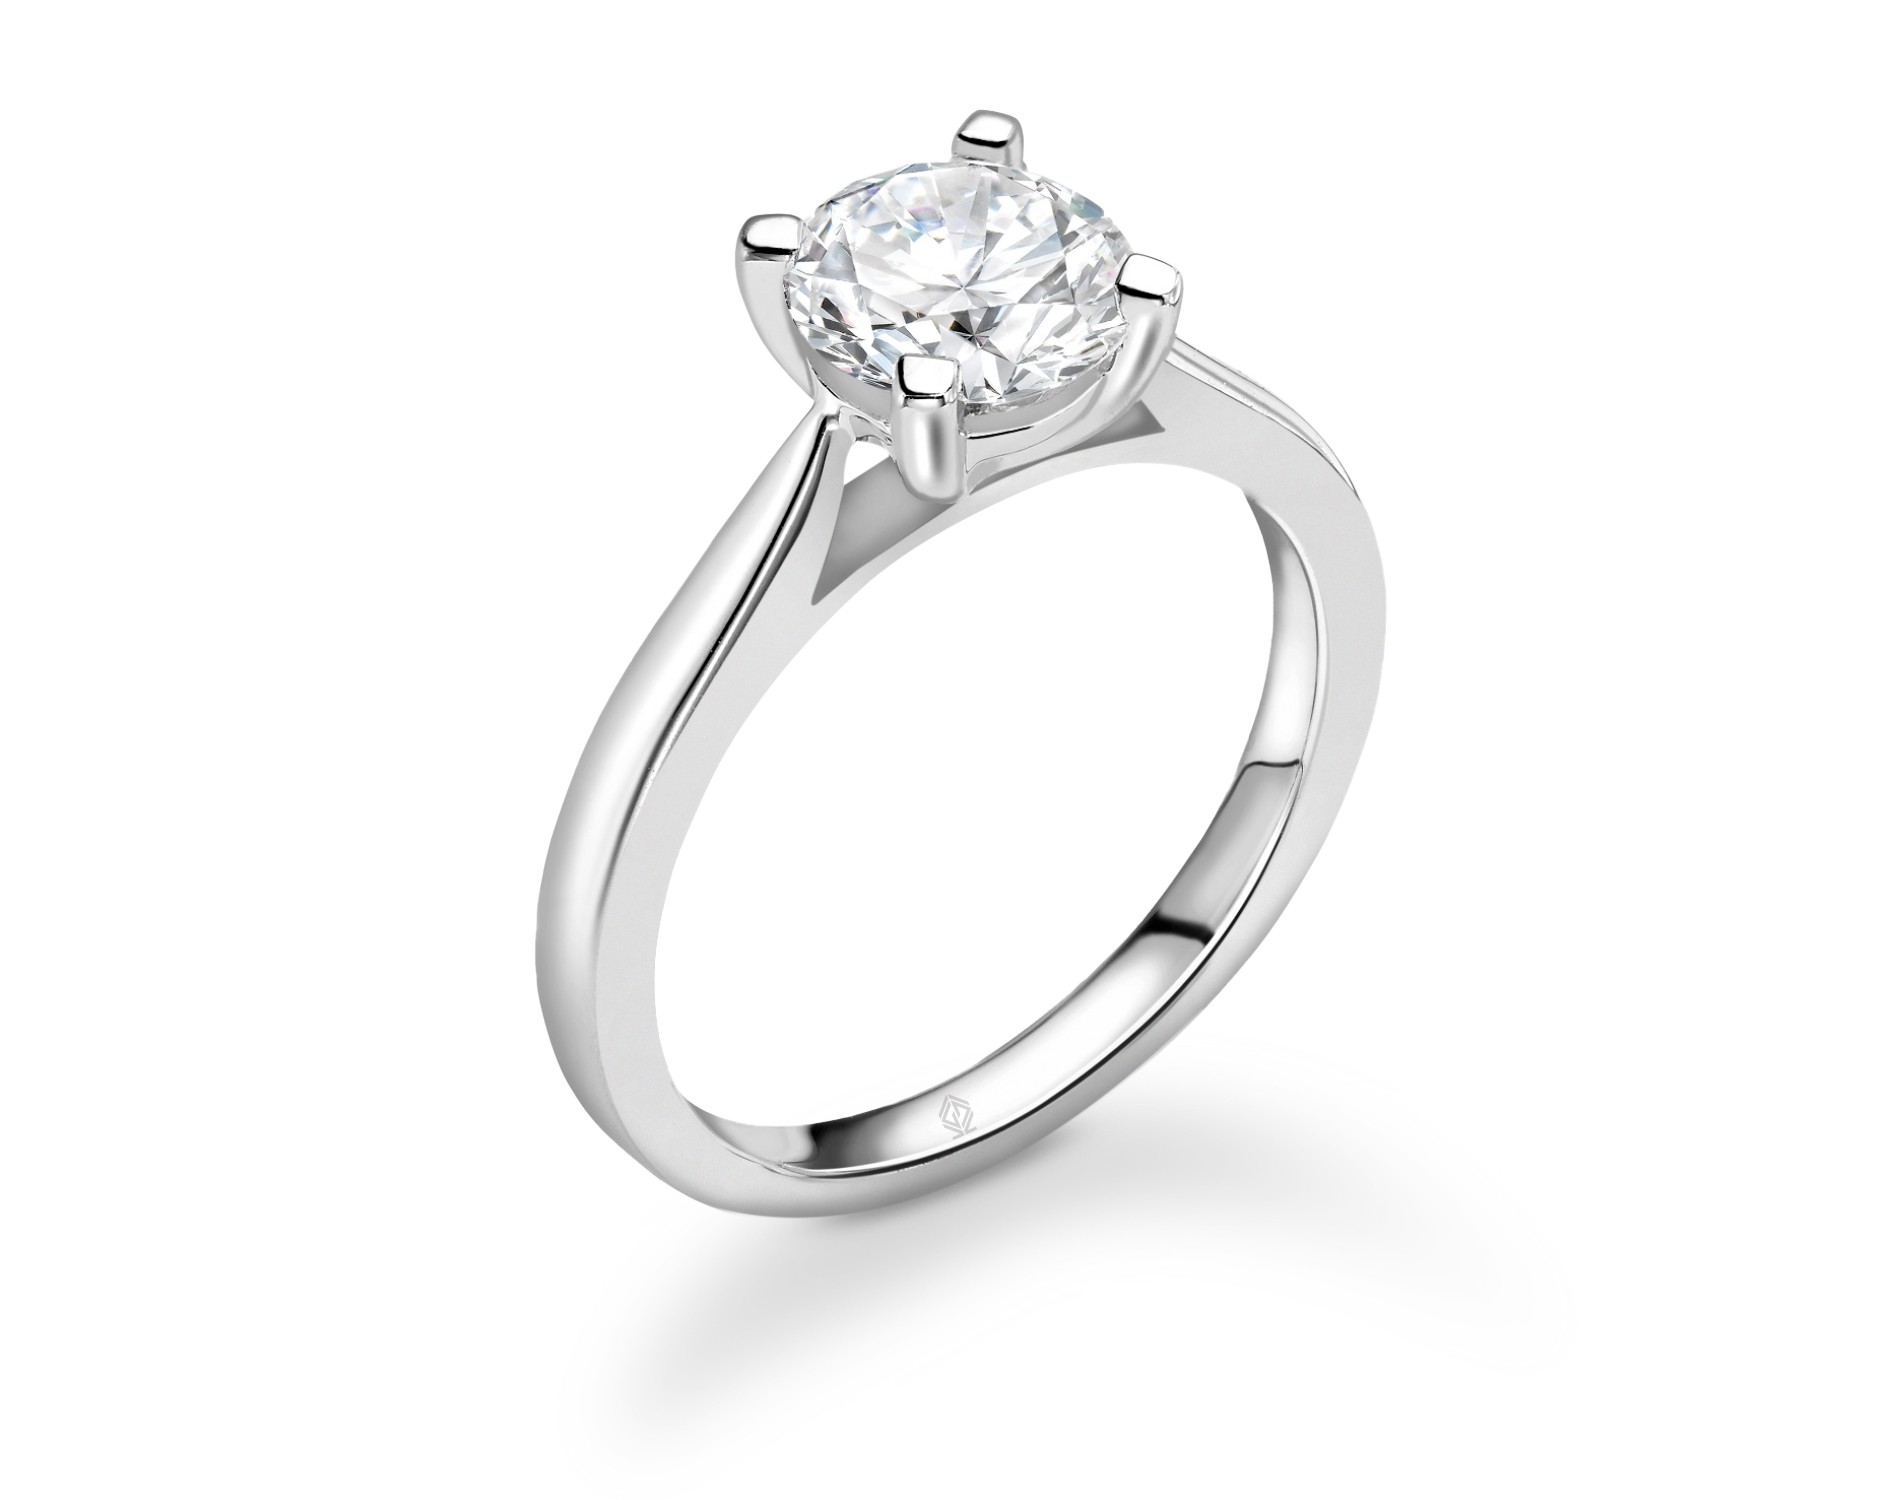 18K WHITE GOLD GOLD 4 PRONGS SOLITAIRE ROUND CUT DIAMOND ENGAGEMENT RING